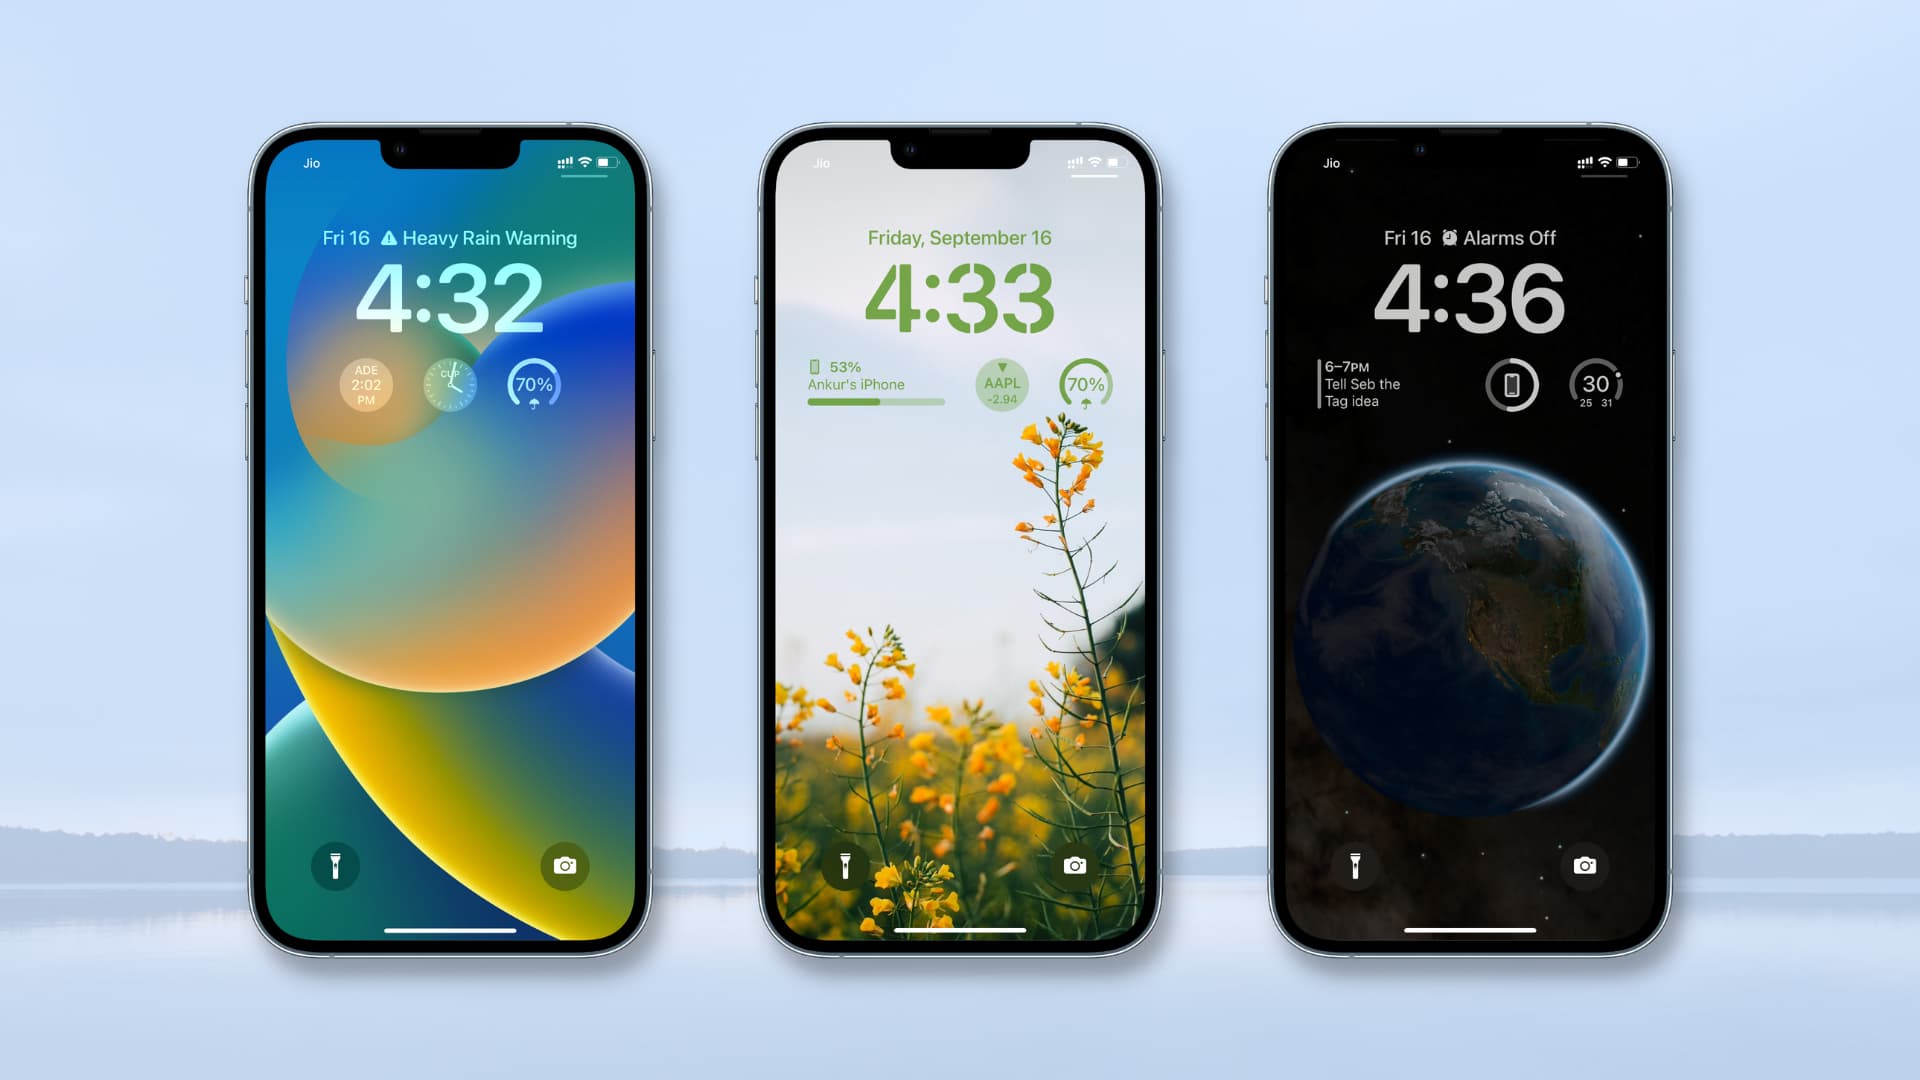 Three iPhone mockups showing different widgets on the Lock Screen in iOS 16